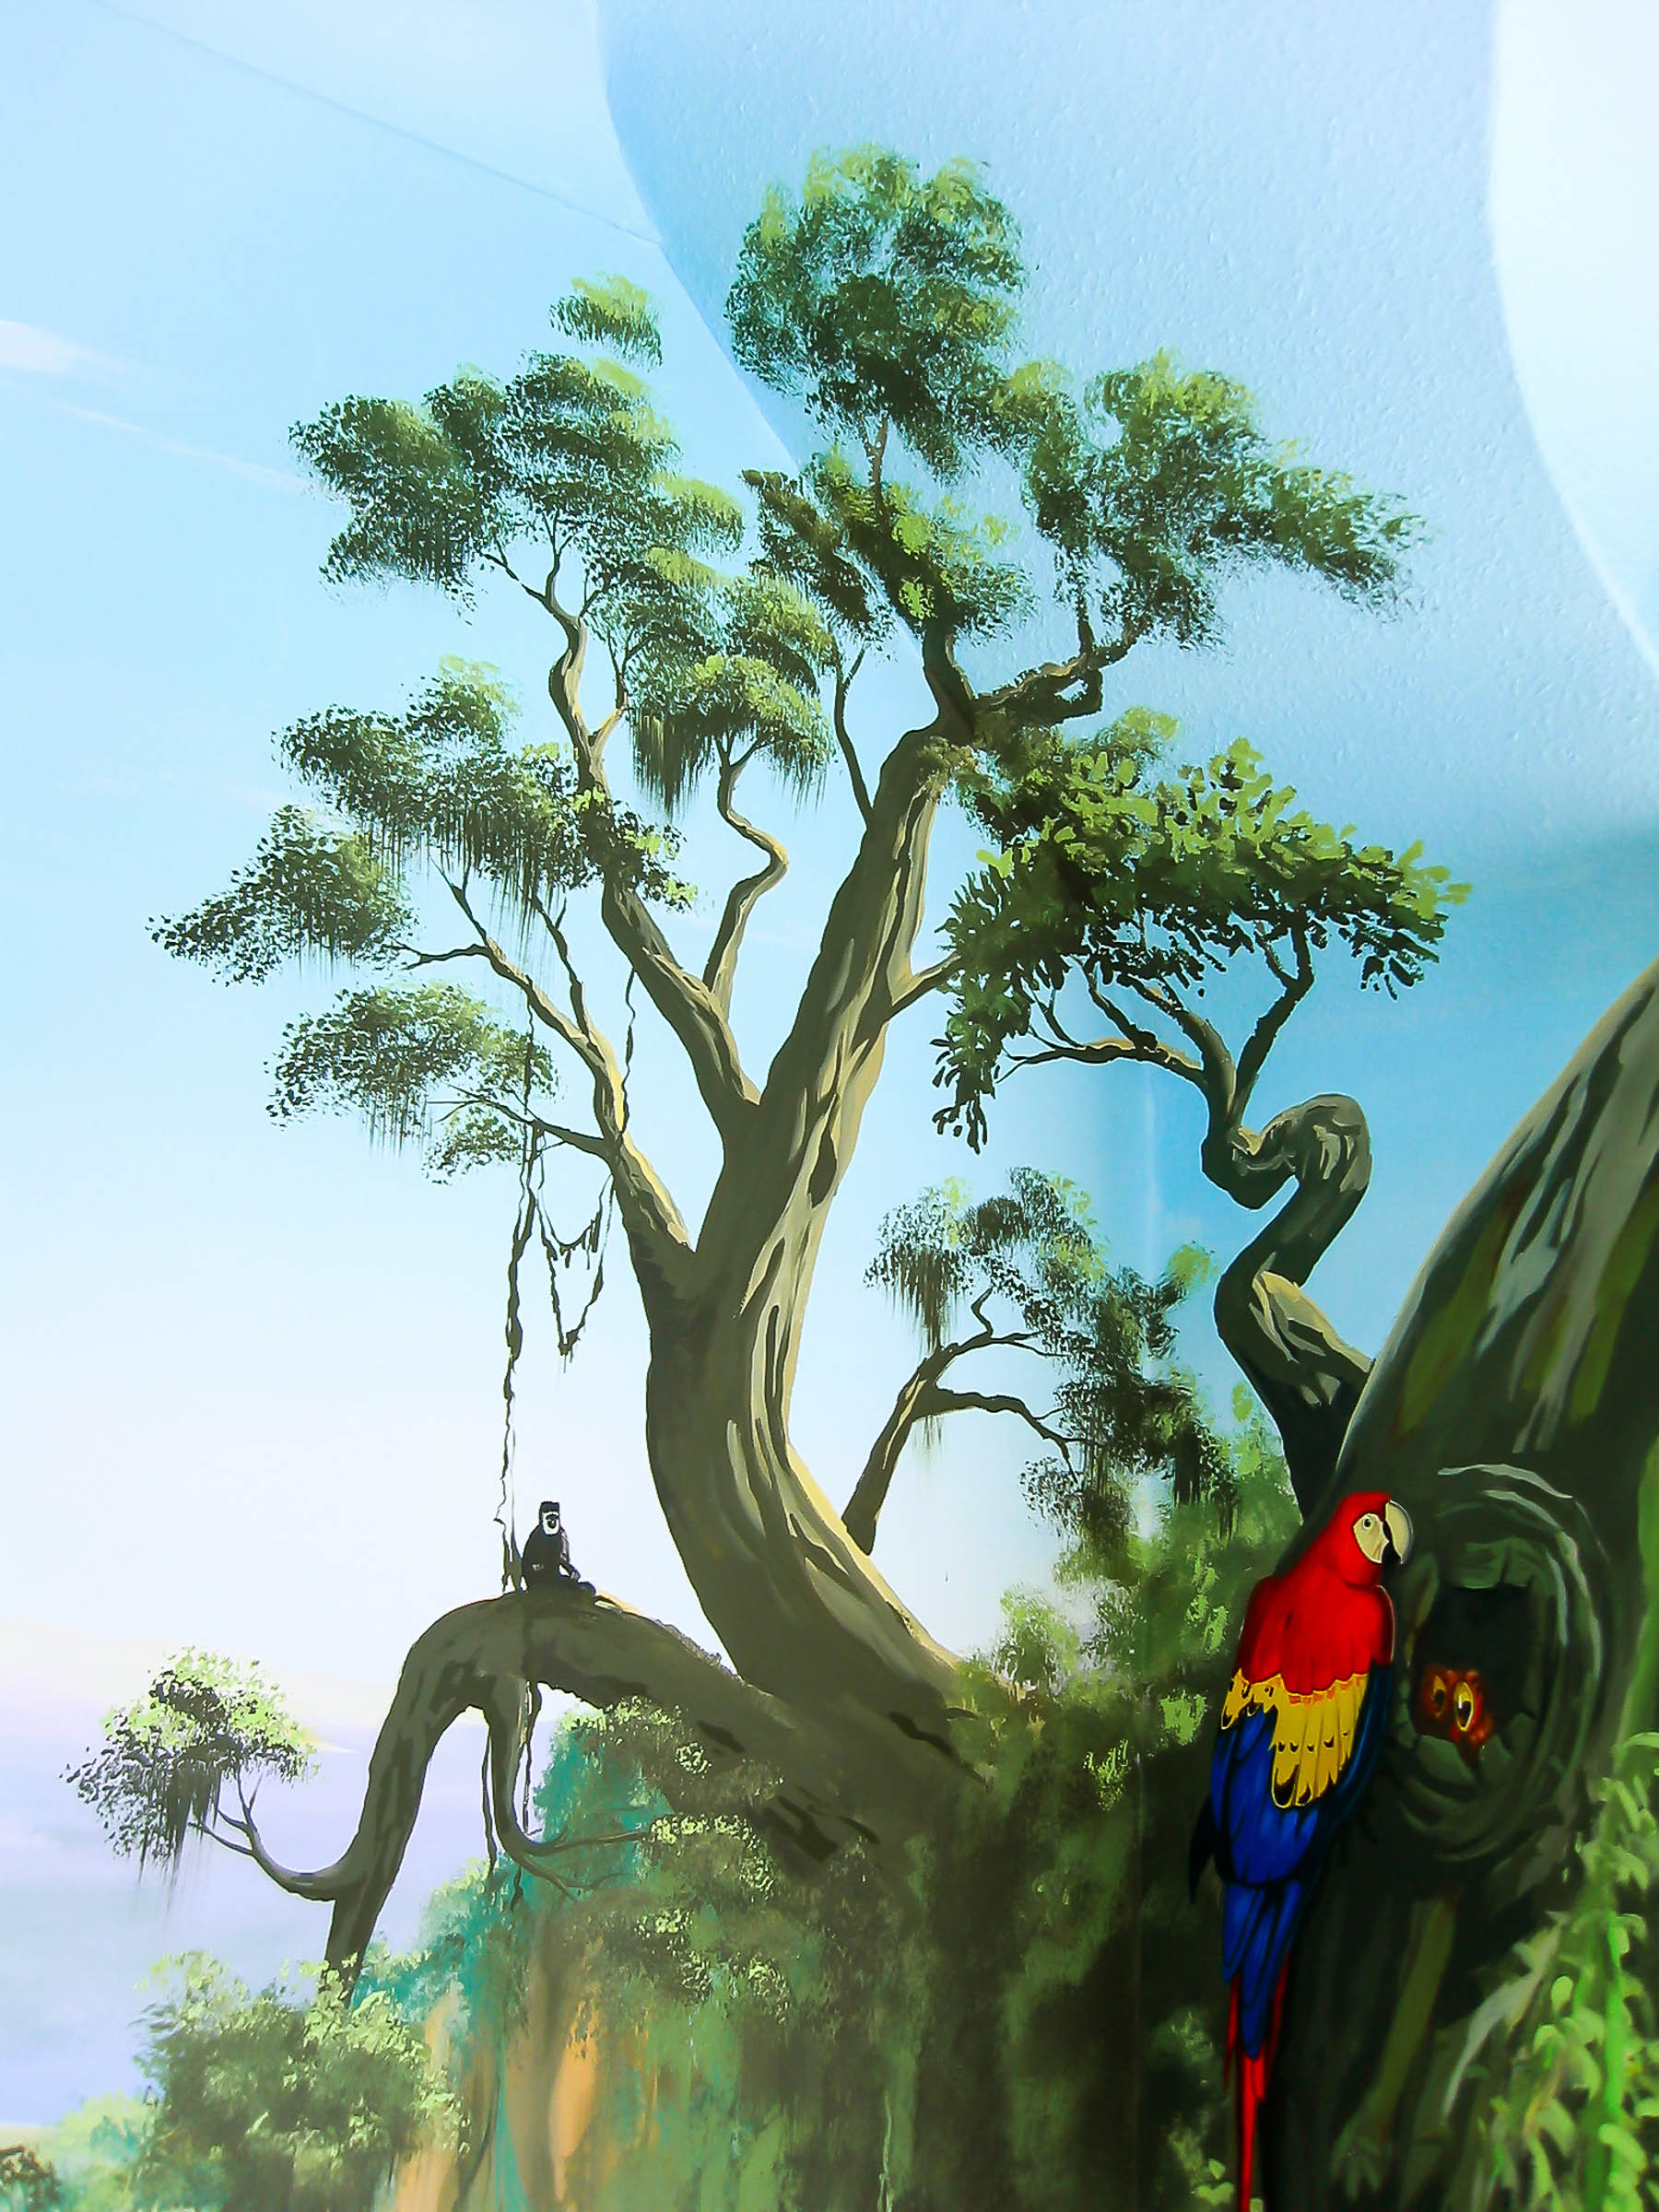 Parrot and a monkey in a couple of trees